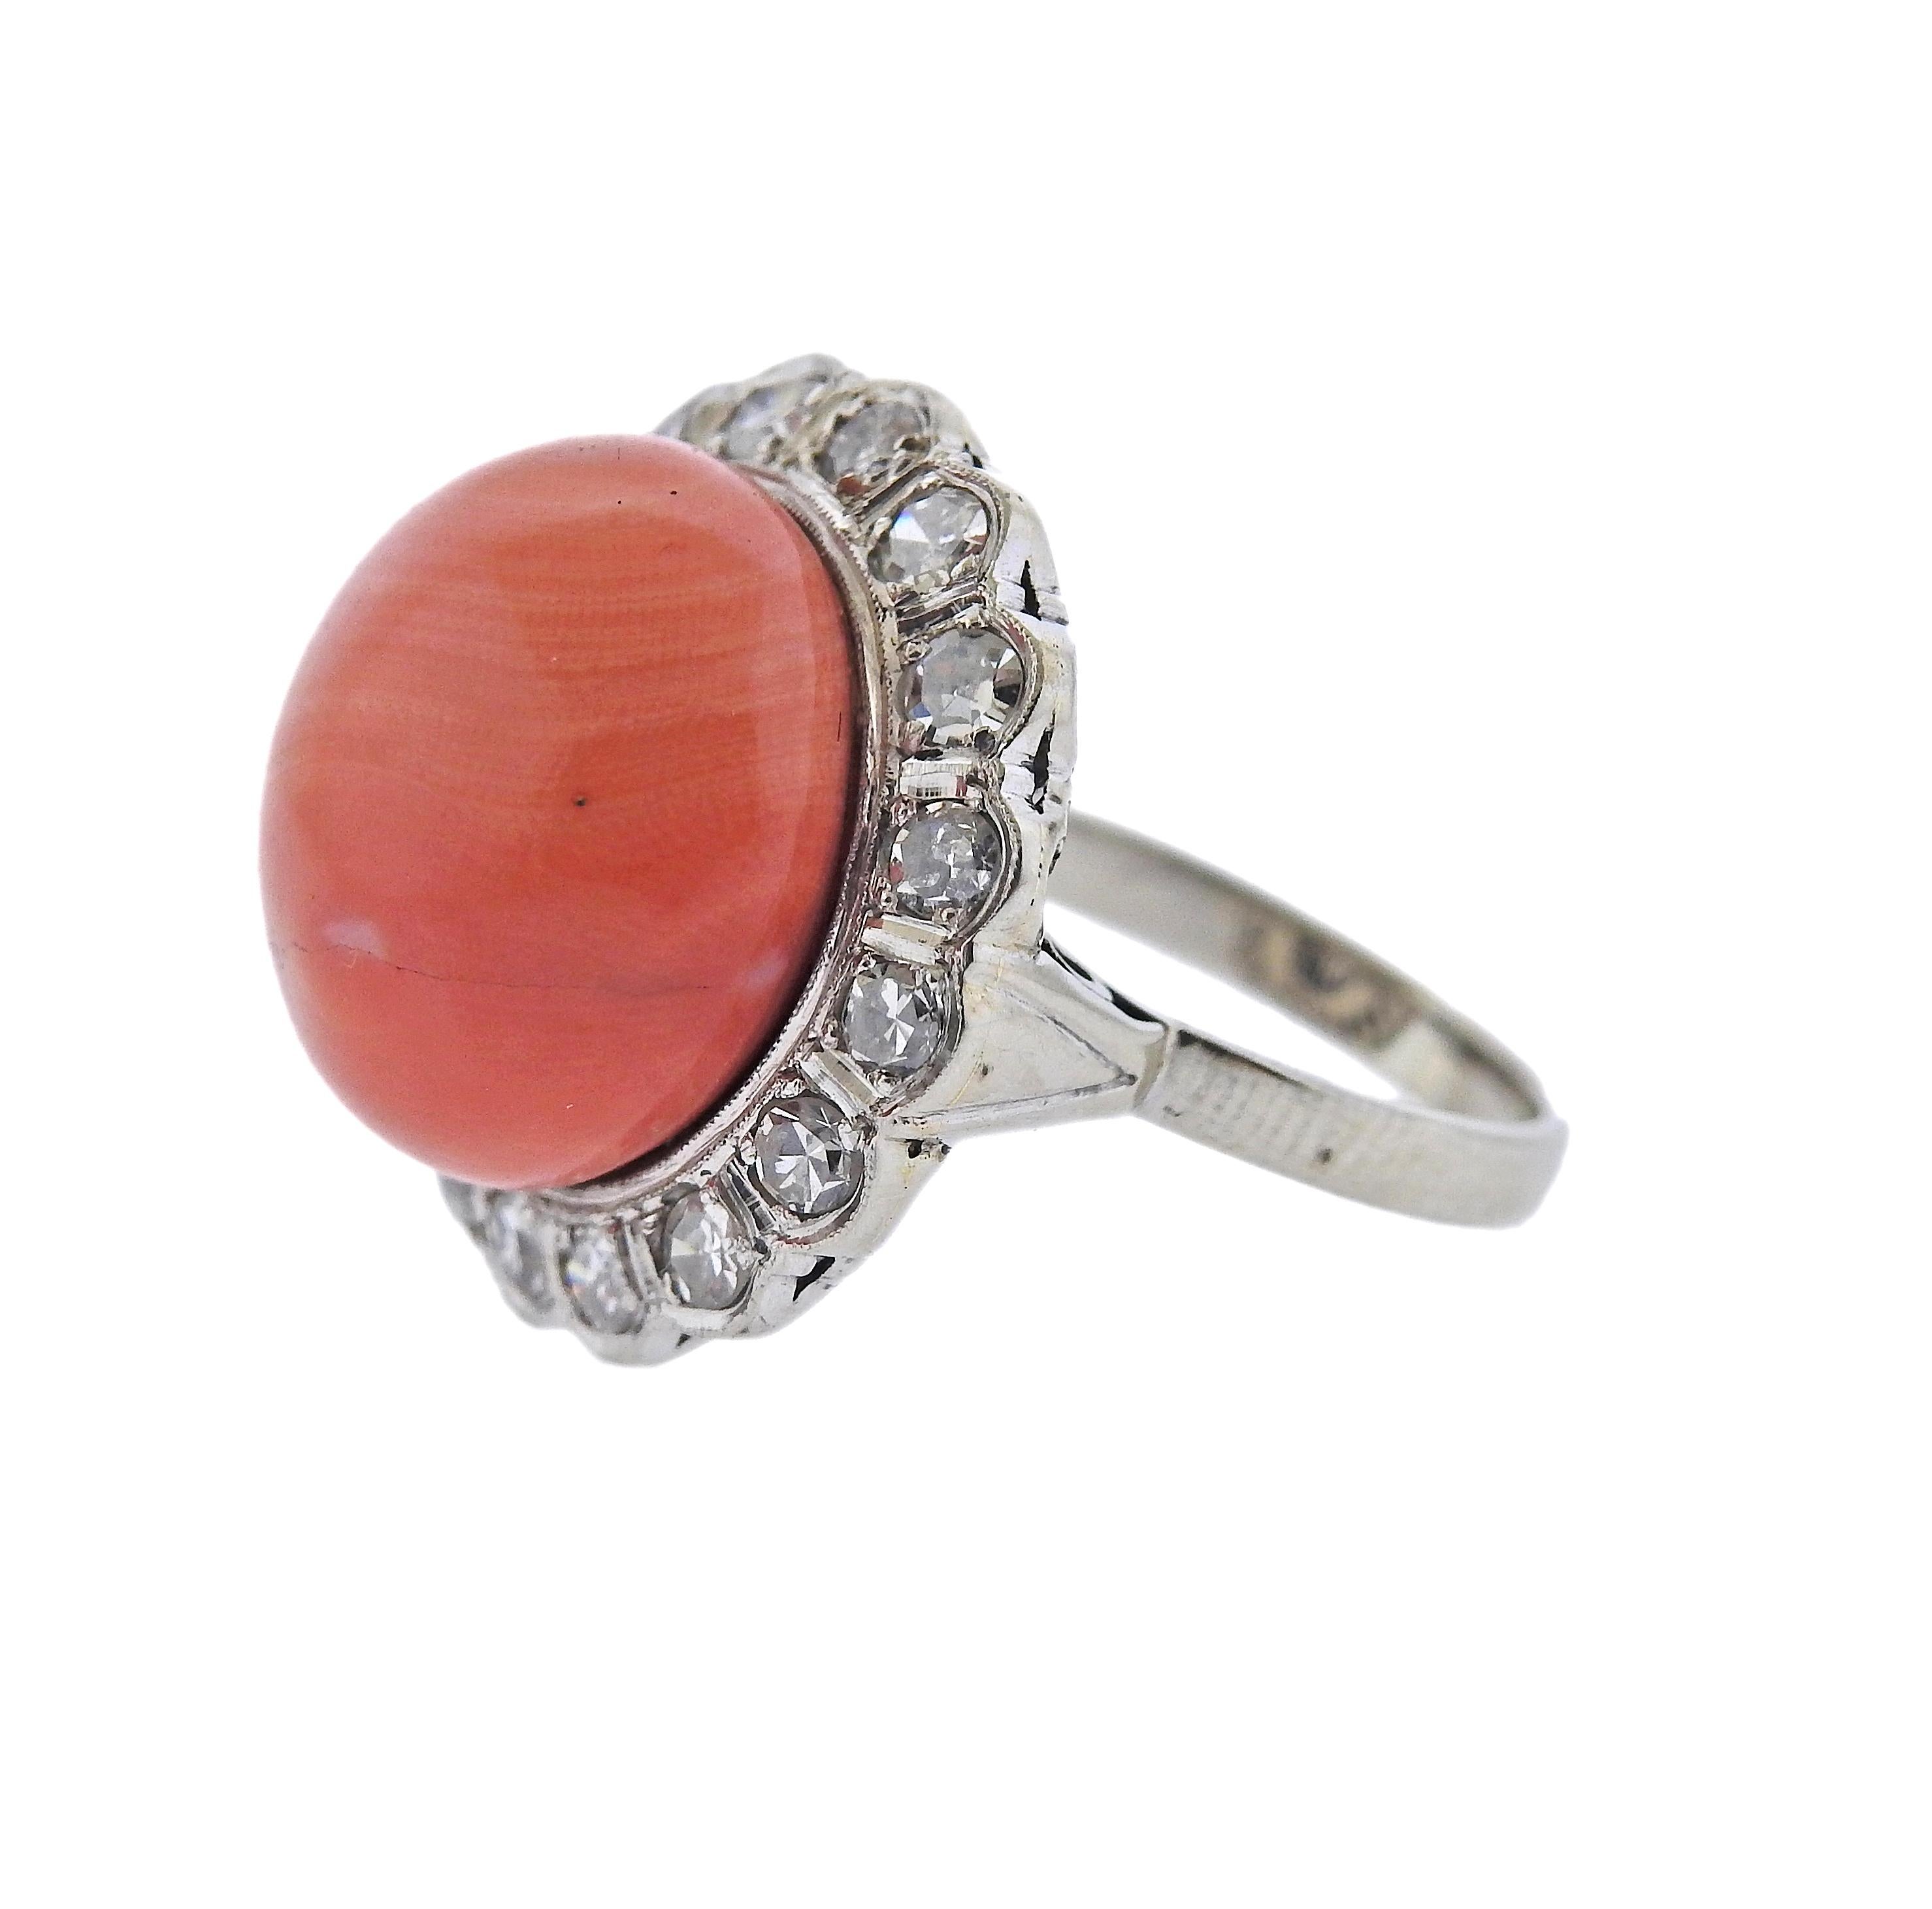 Vintage 14k gold cocktail ring, with center 15mm coral, surrounded with approx. 0.80ctw in diamonds. Ring size - 5.5, ring top is 20mm in diameter. Marked 14k. Weight - 7.5 grams.